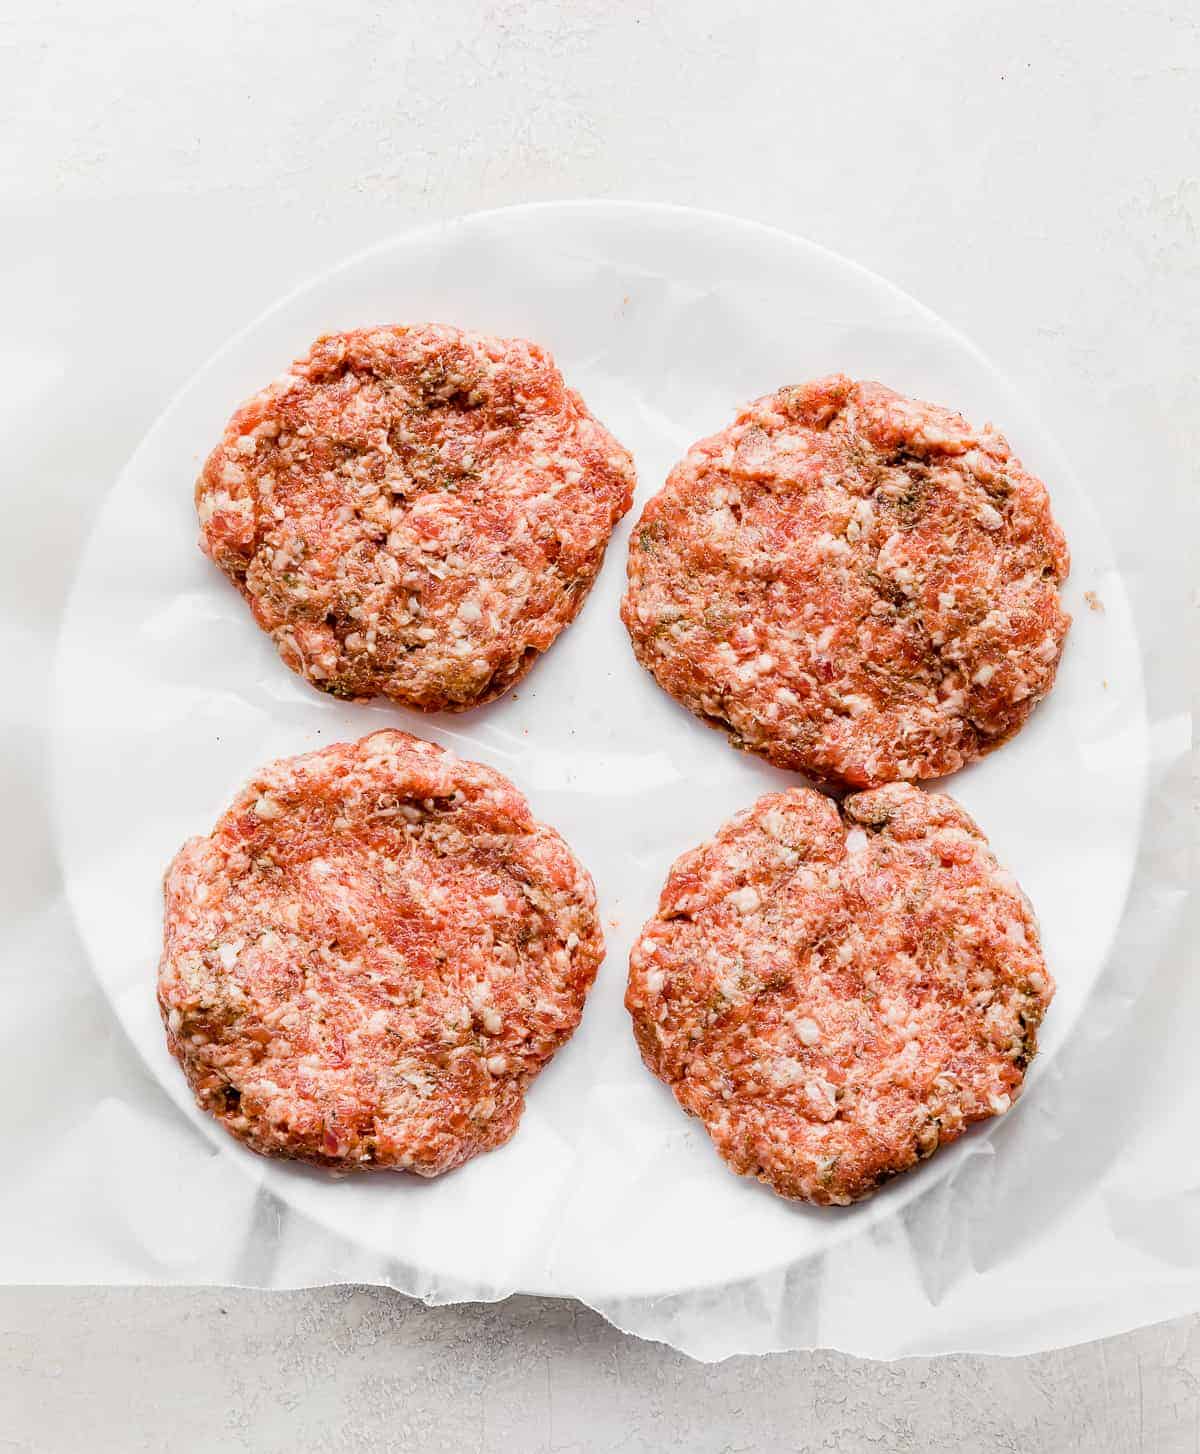 Four raw sausage patties on a white plate.